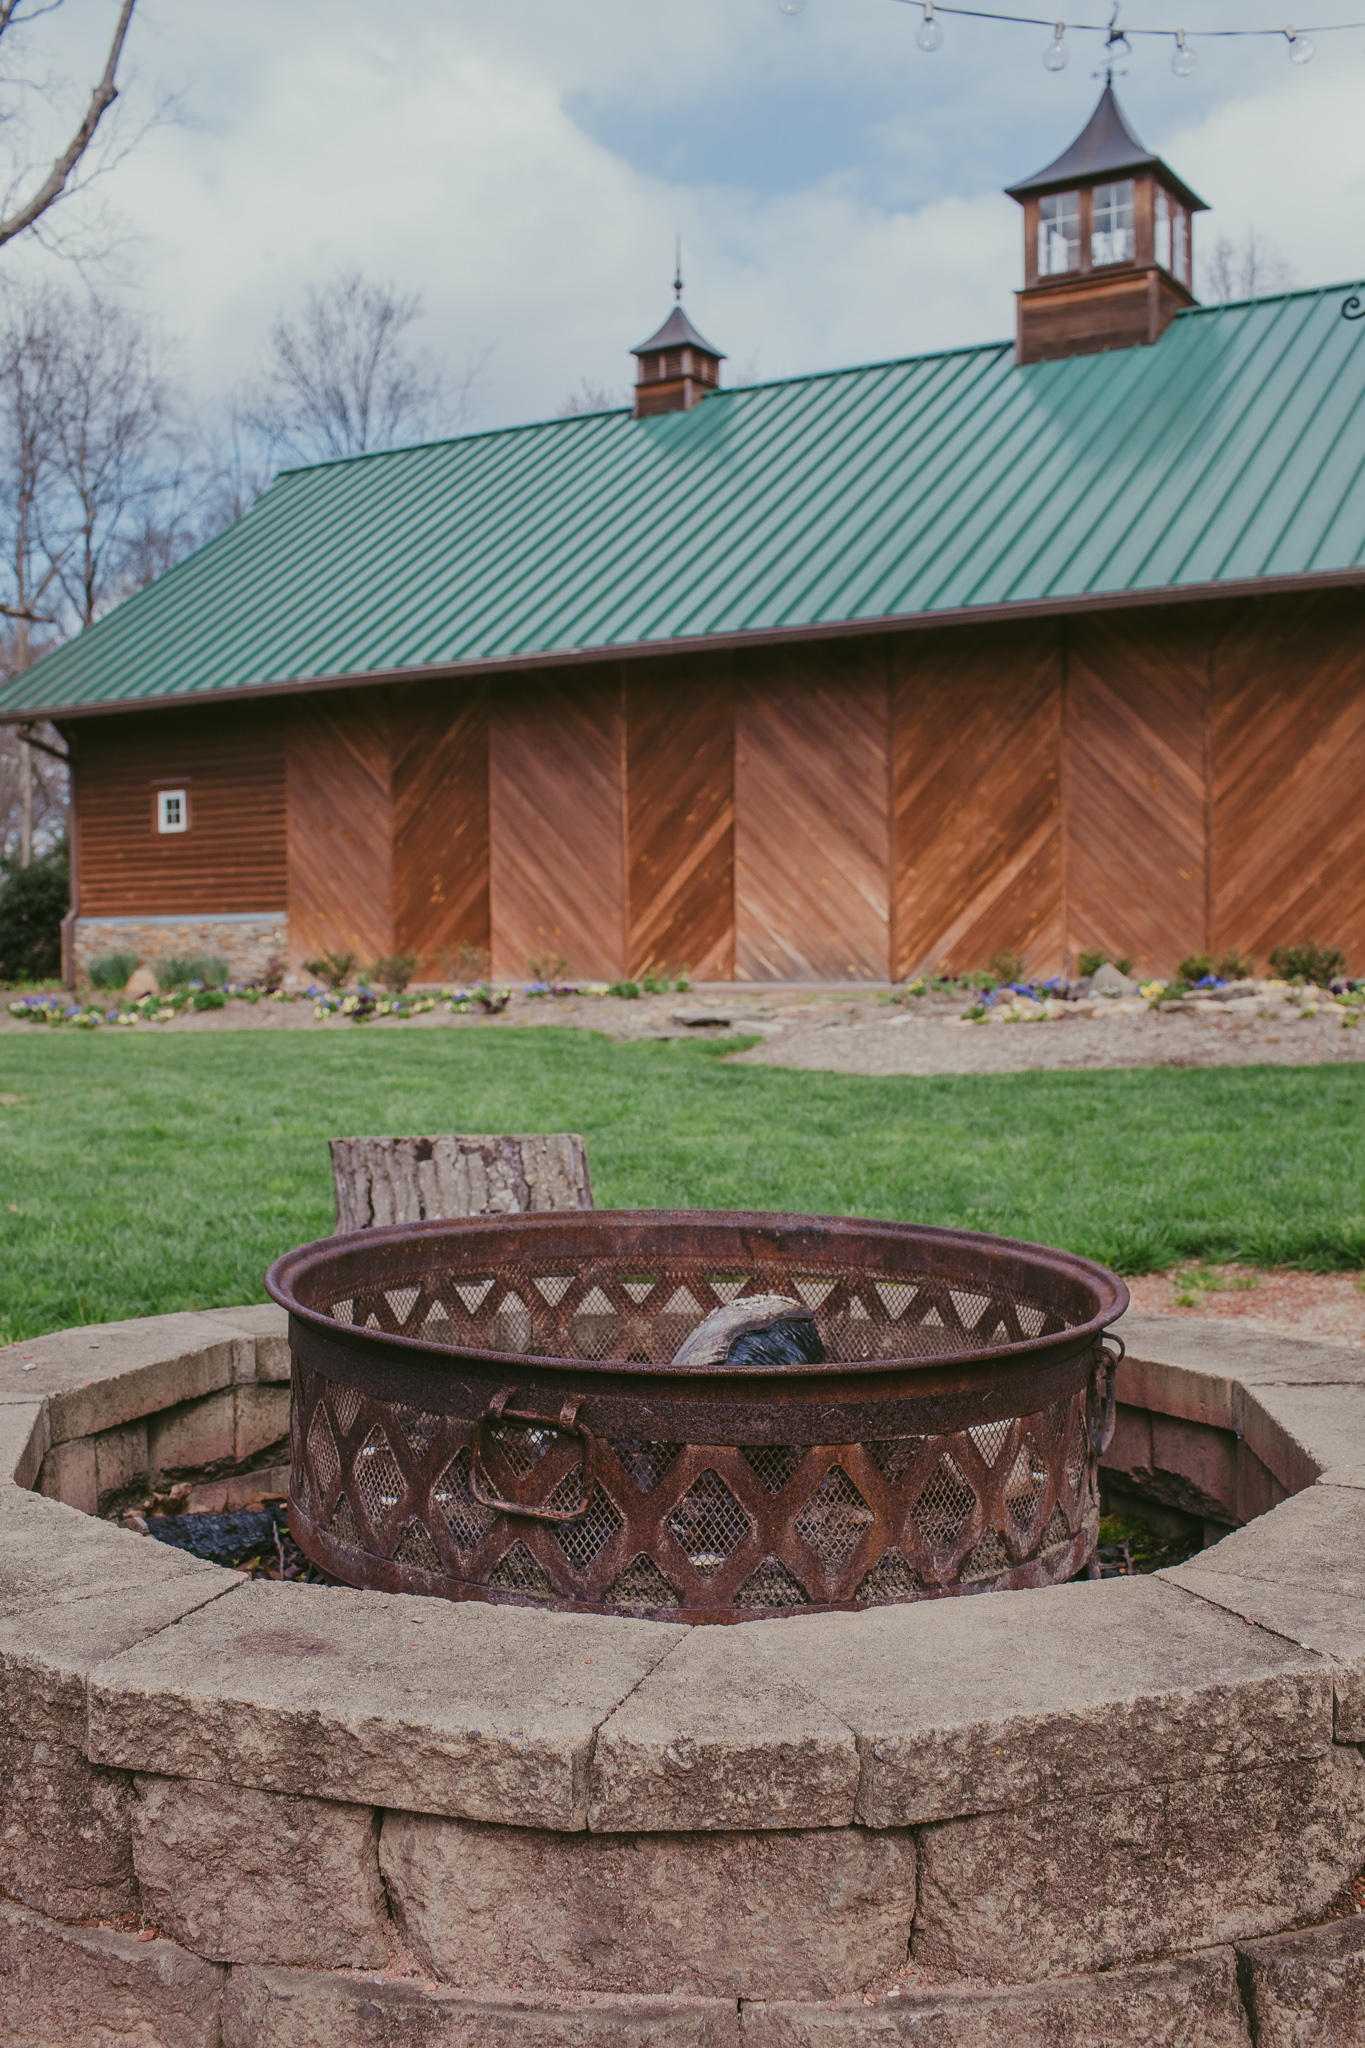 The fire pit at Alexander homestead